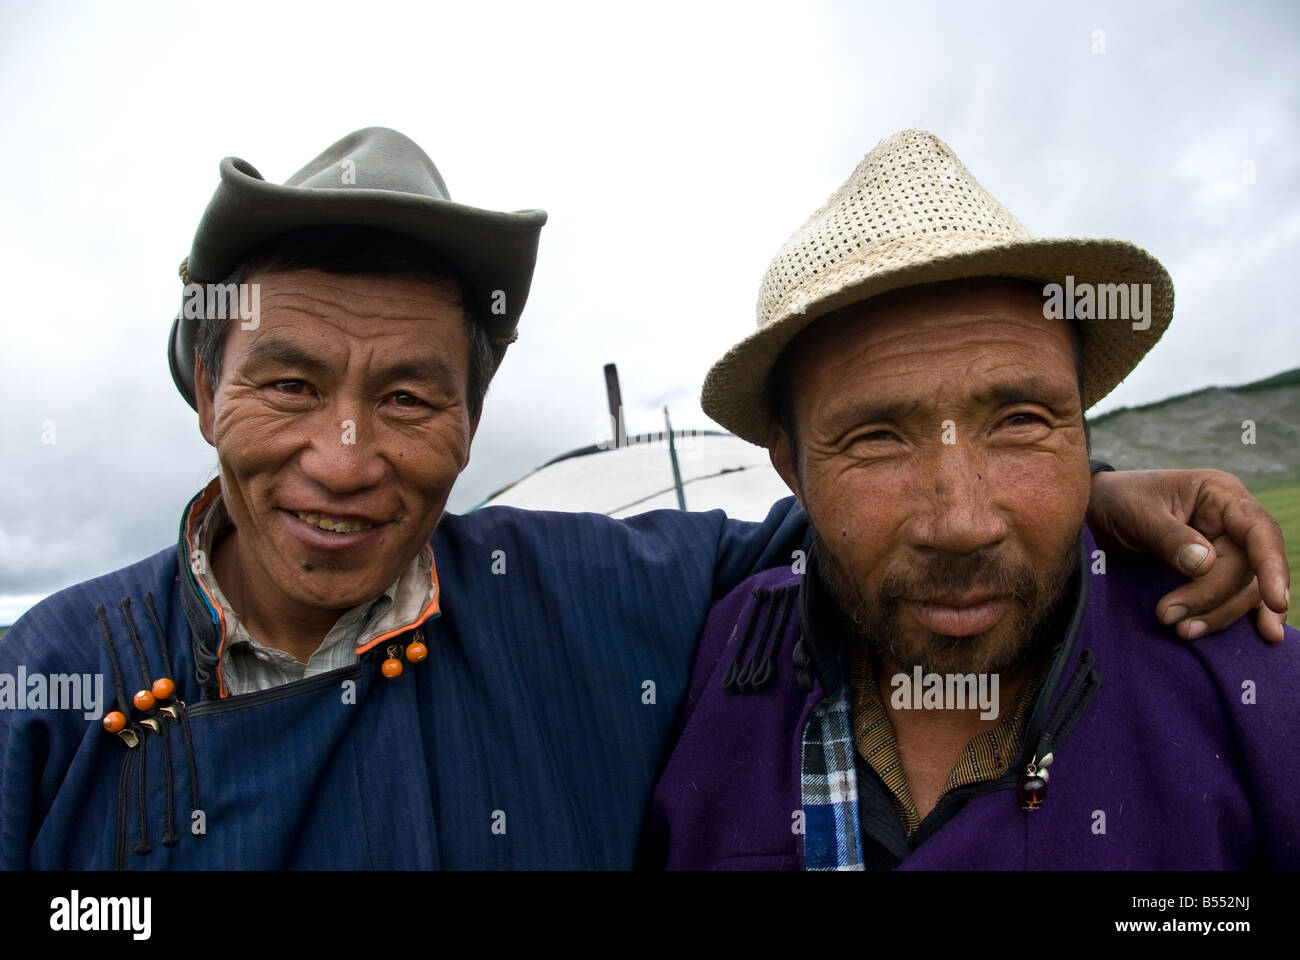 local-nomads-in-northern-mongolia-B552NJ